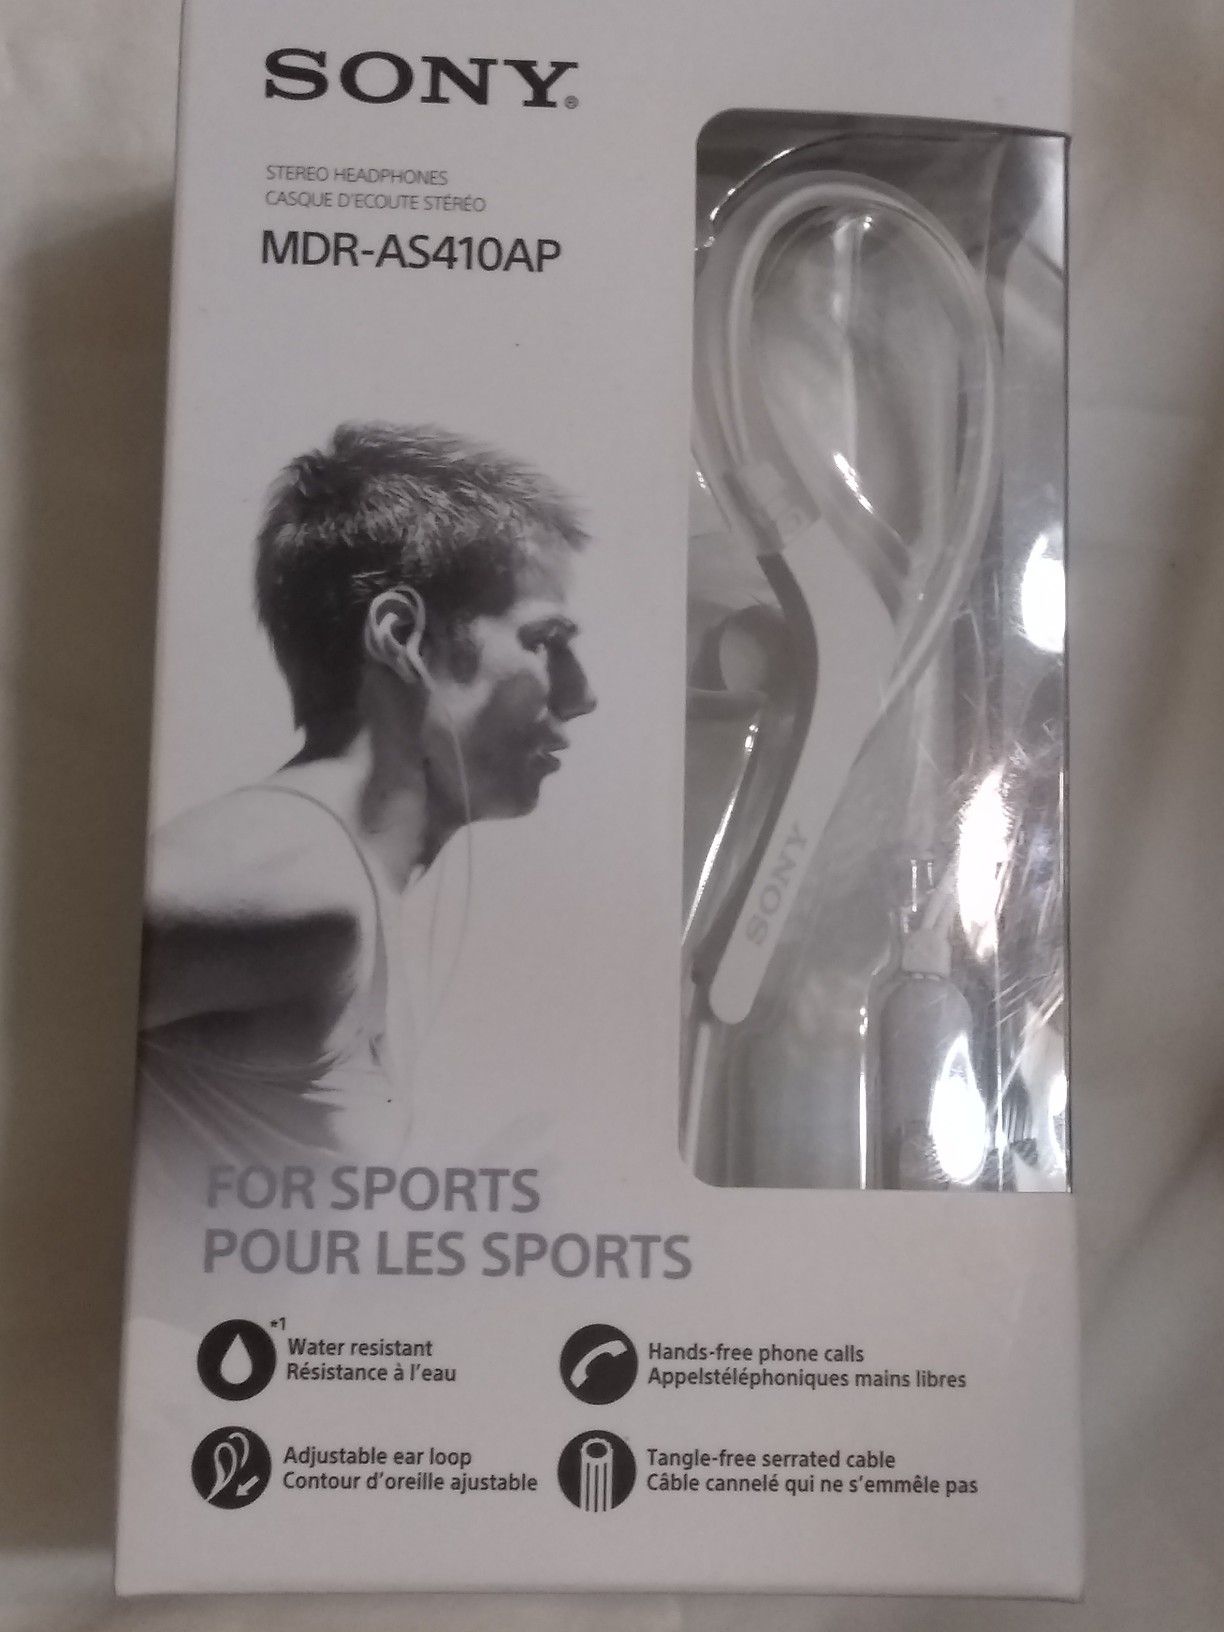 .Sony Sports Headphones AS410AP. Top Sony quality. BRAND NEW! PICK UP PLEASE! Thank you for looking 🌞